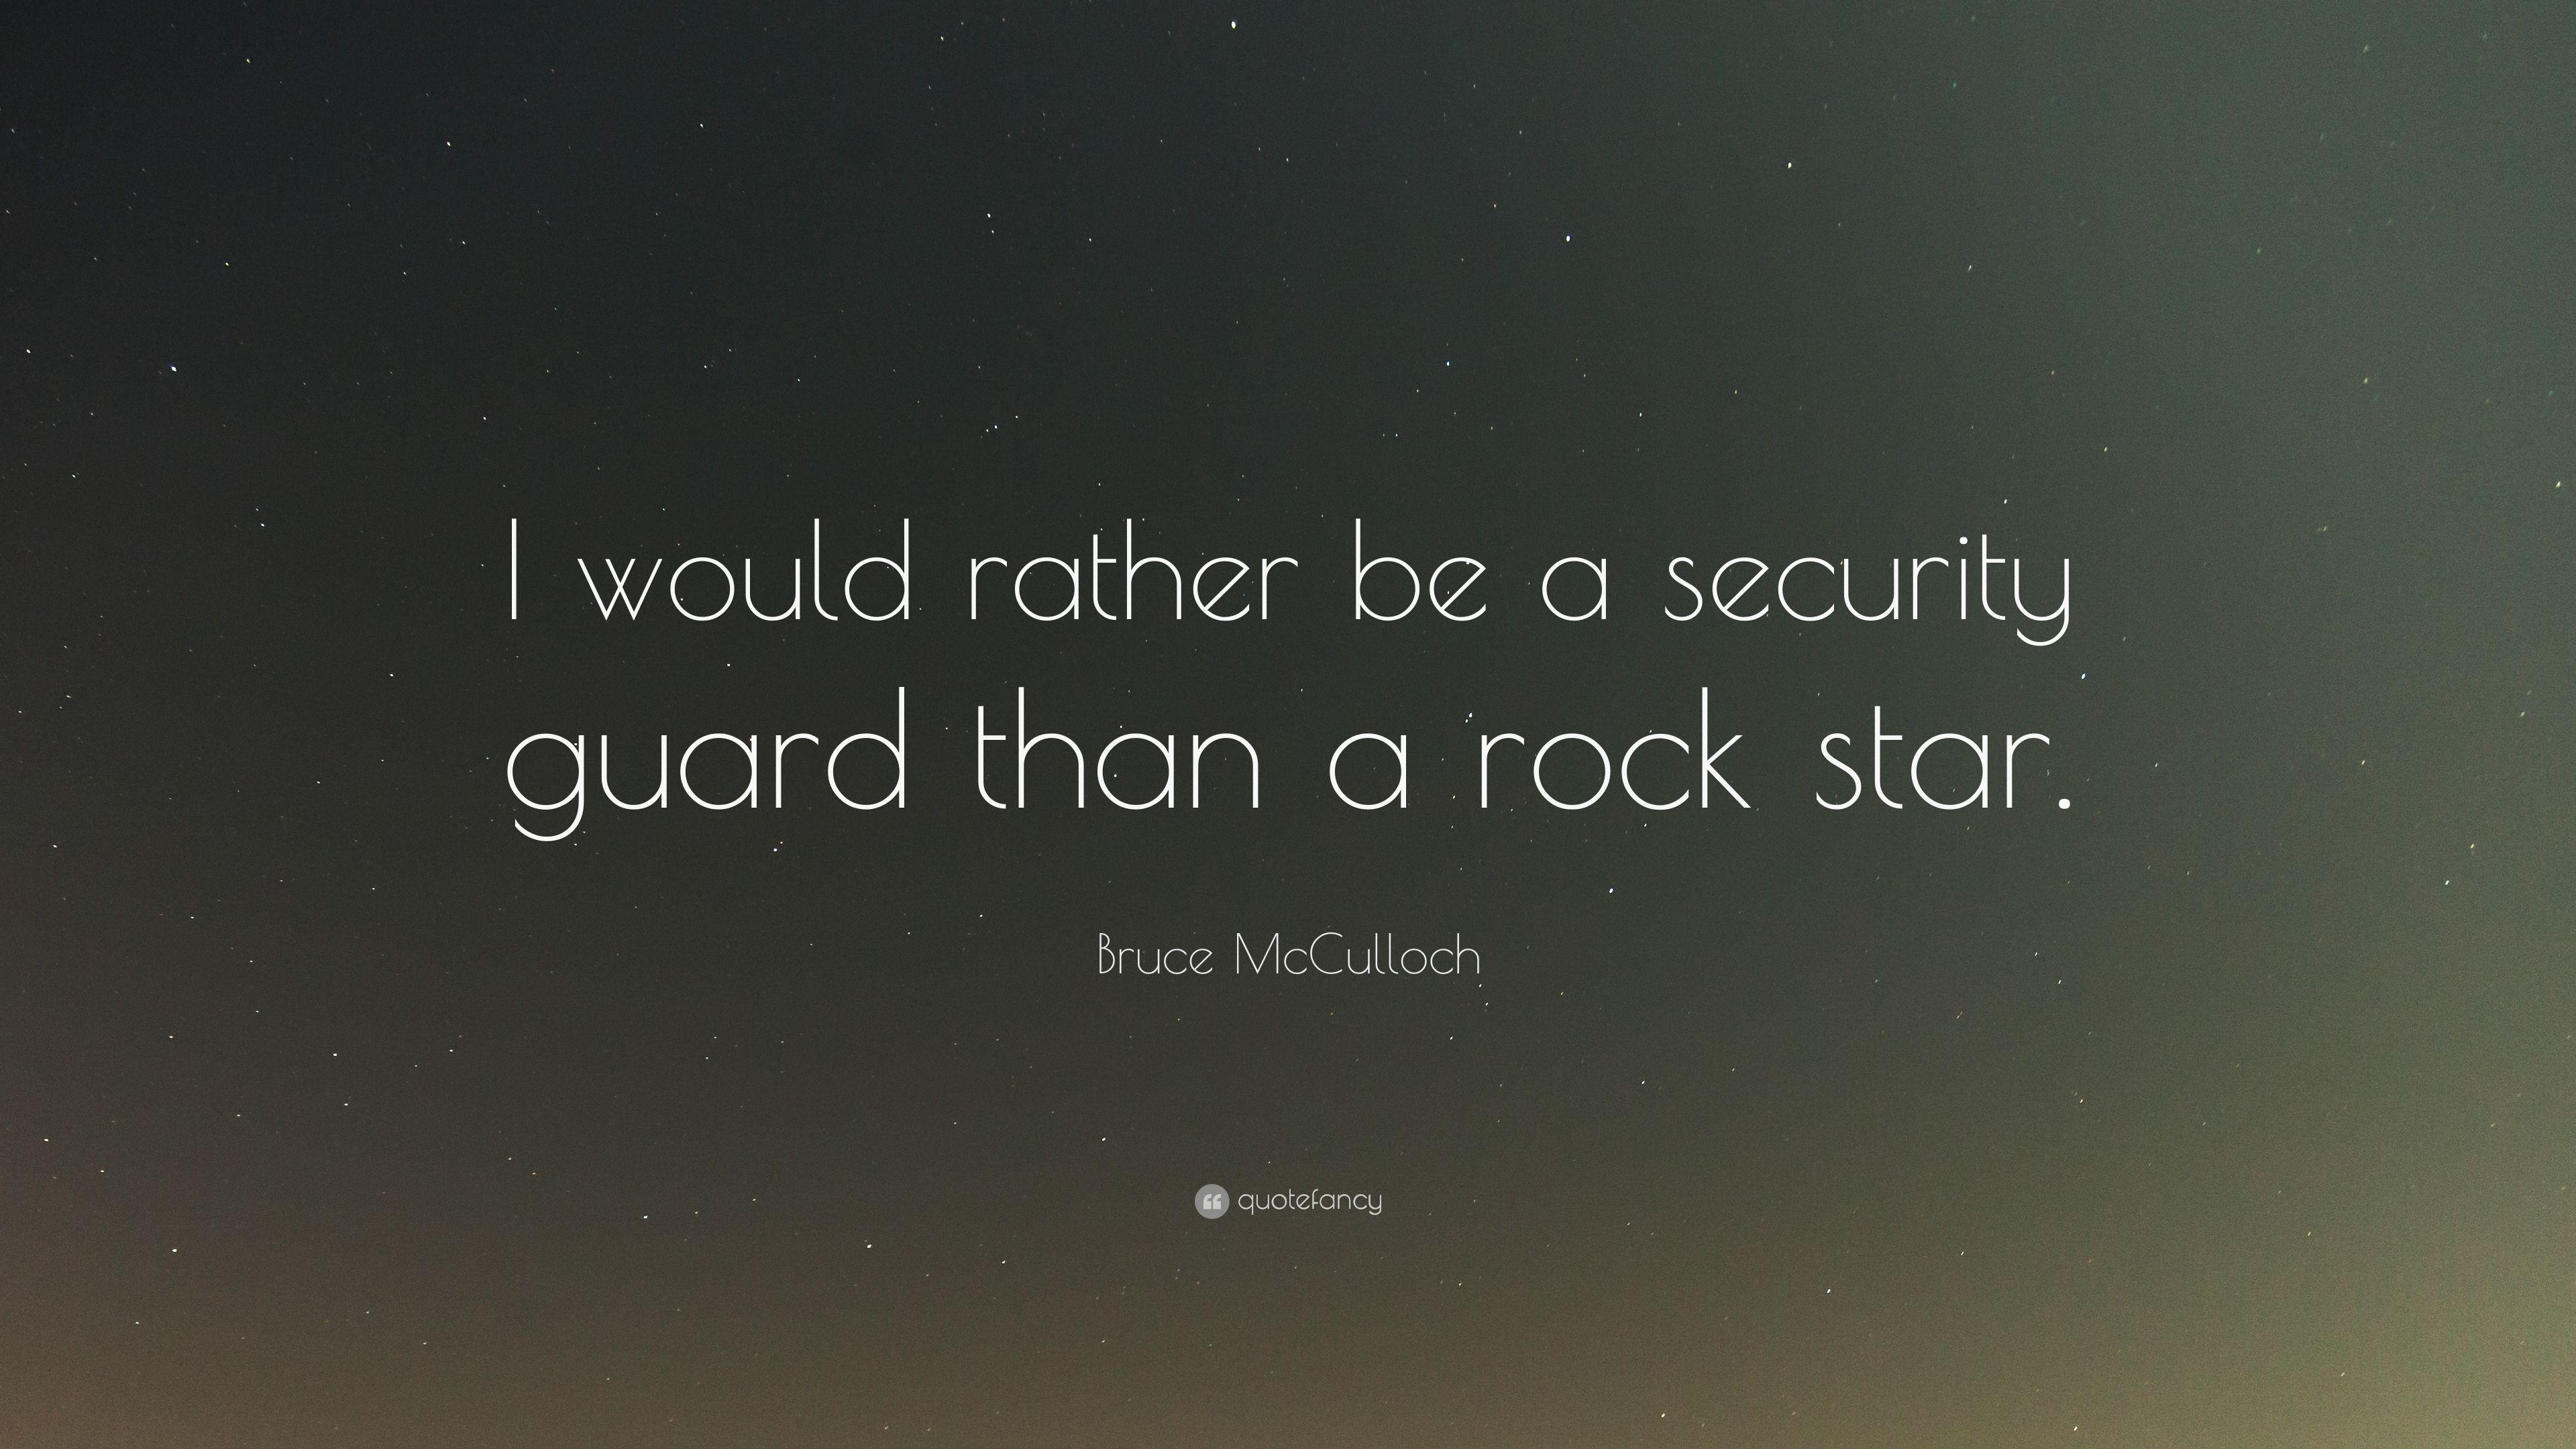 Bruce McCulloch Quote: “I would rather be a security guard than a